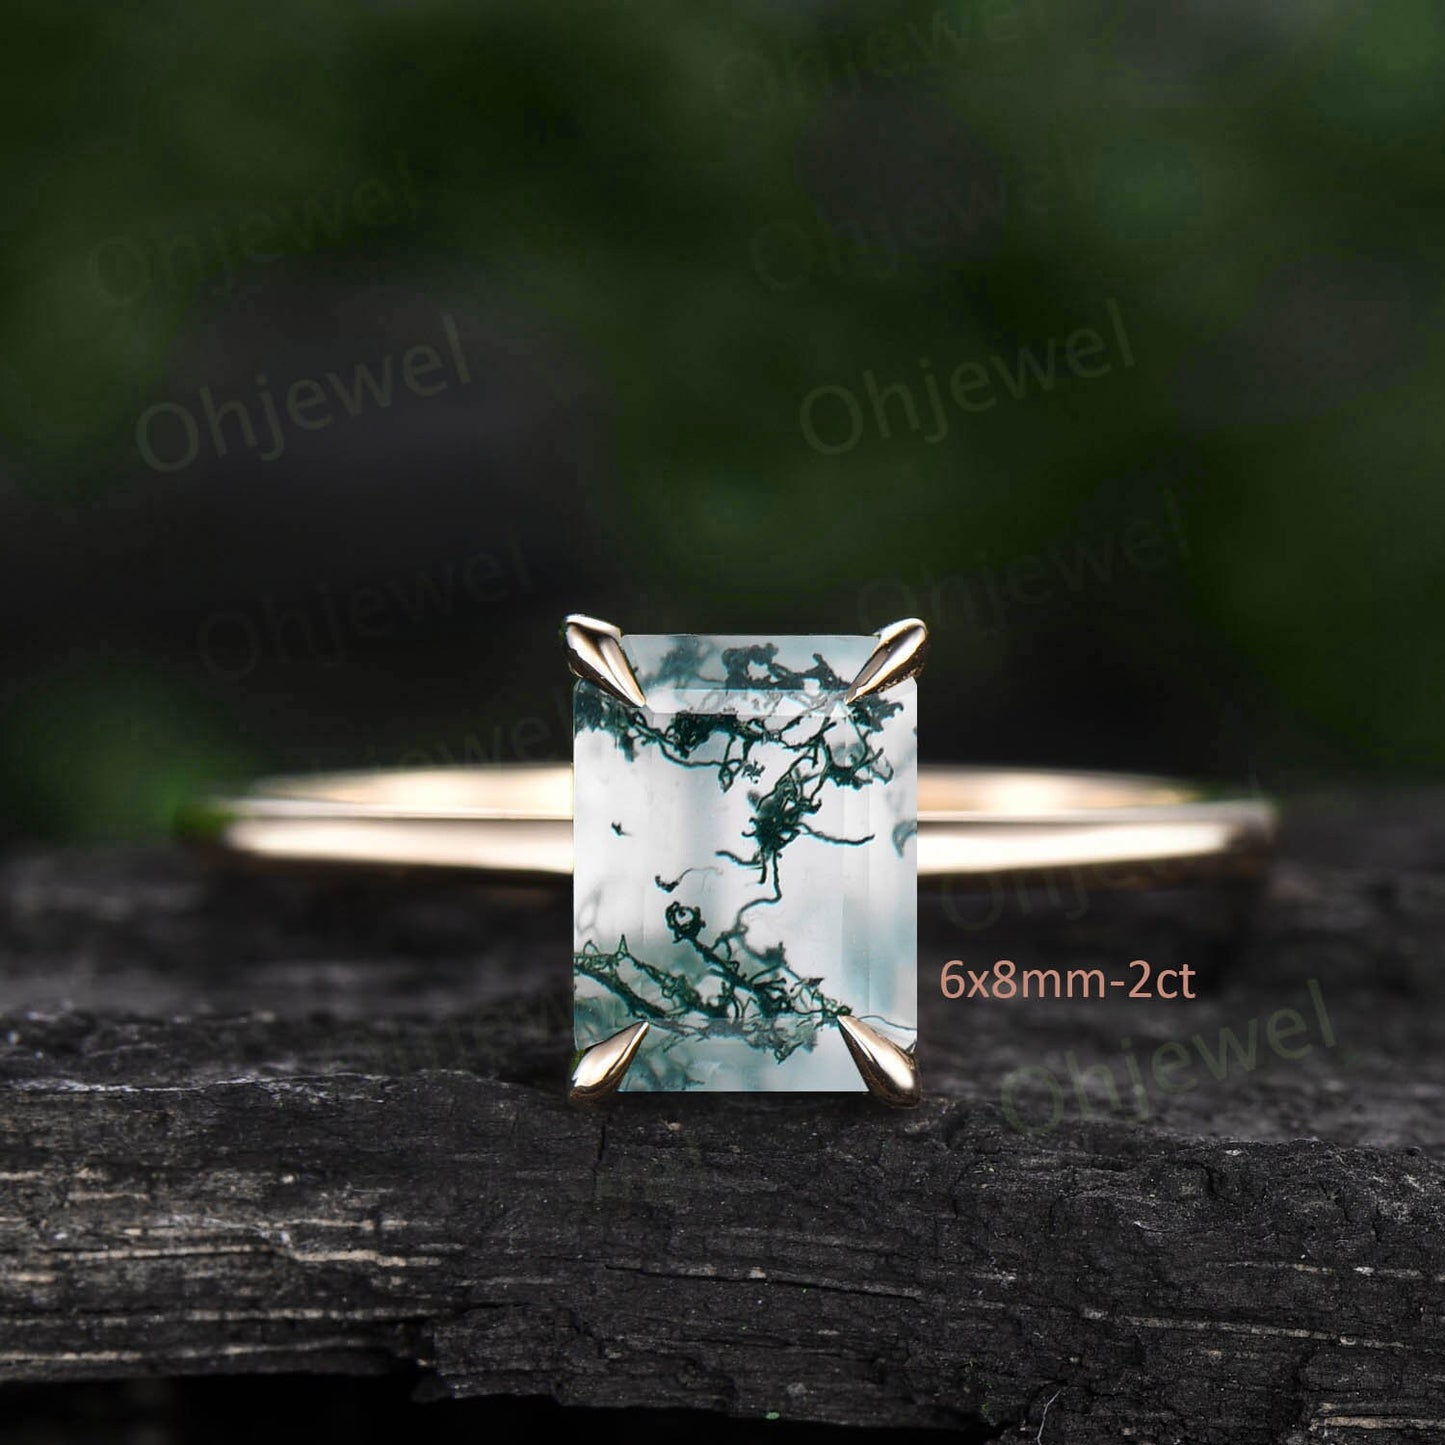 4ct emerald cut green moss agate engagement ring rose gold vintage unique Solitaire engagement ring women sterling silver promise ring gift